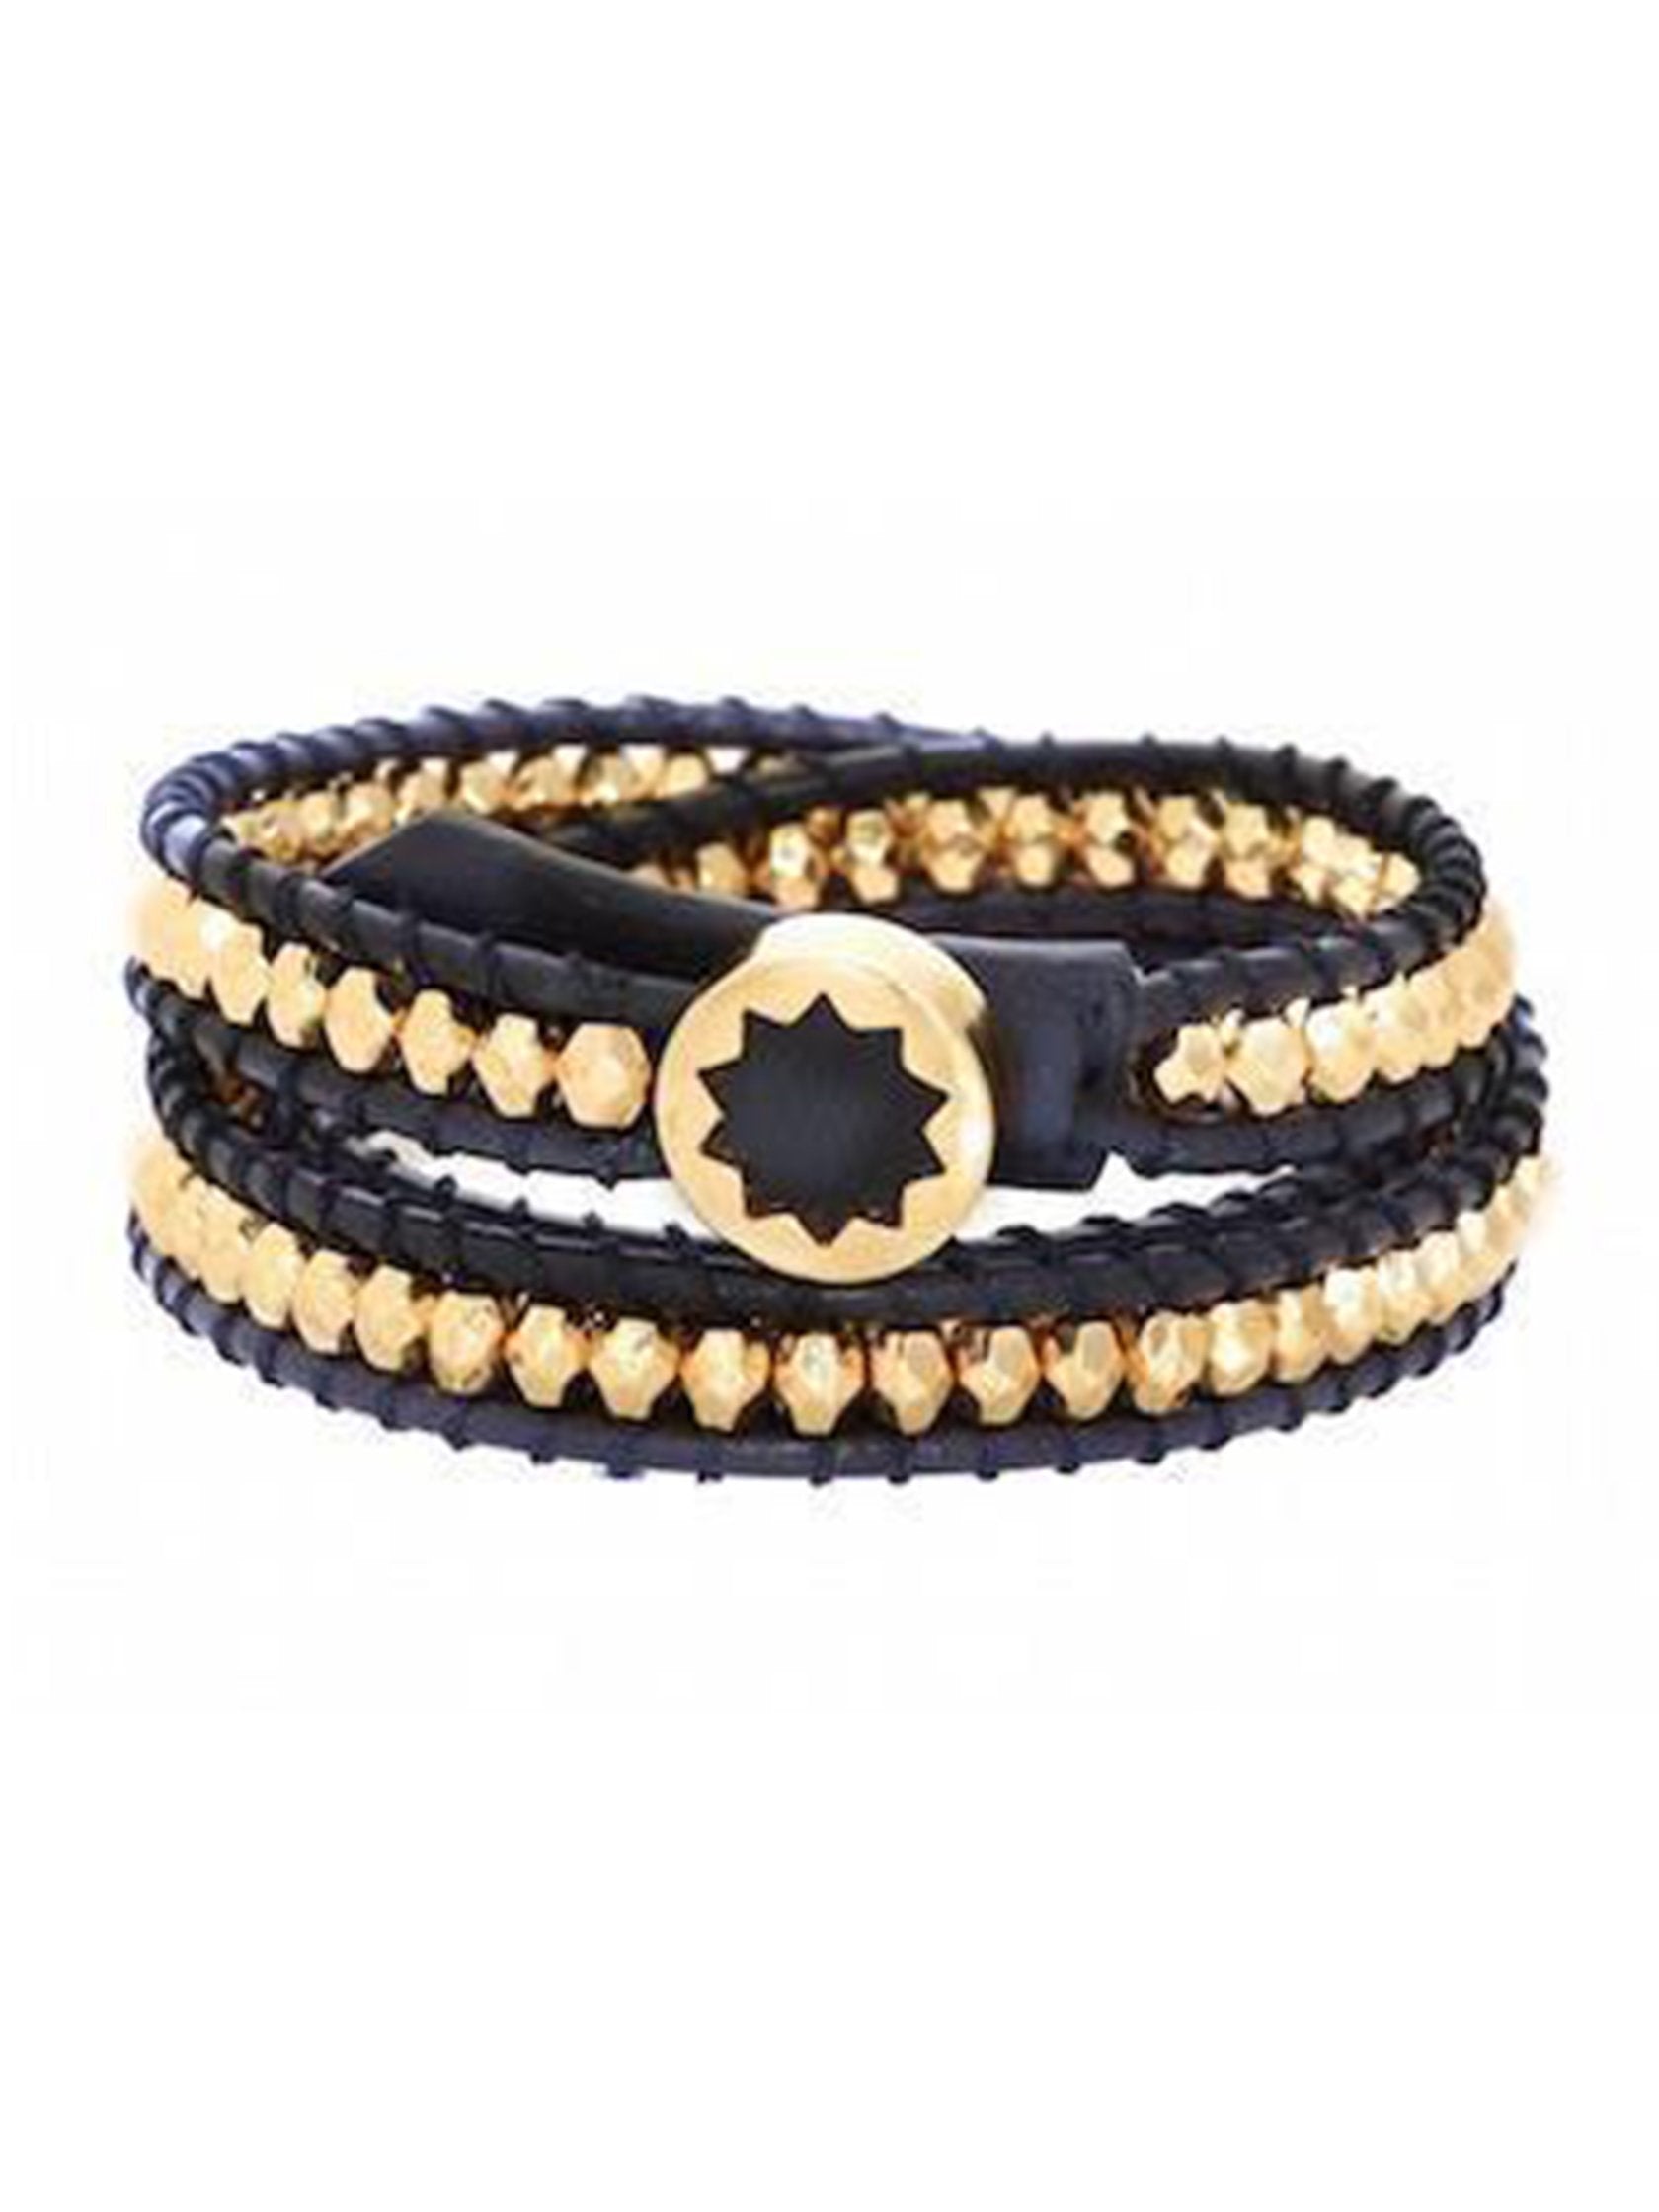 Women outfit in a bracelet rental from House of Harlow 1960 called Karma Wrap Bracelet